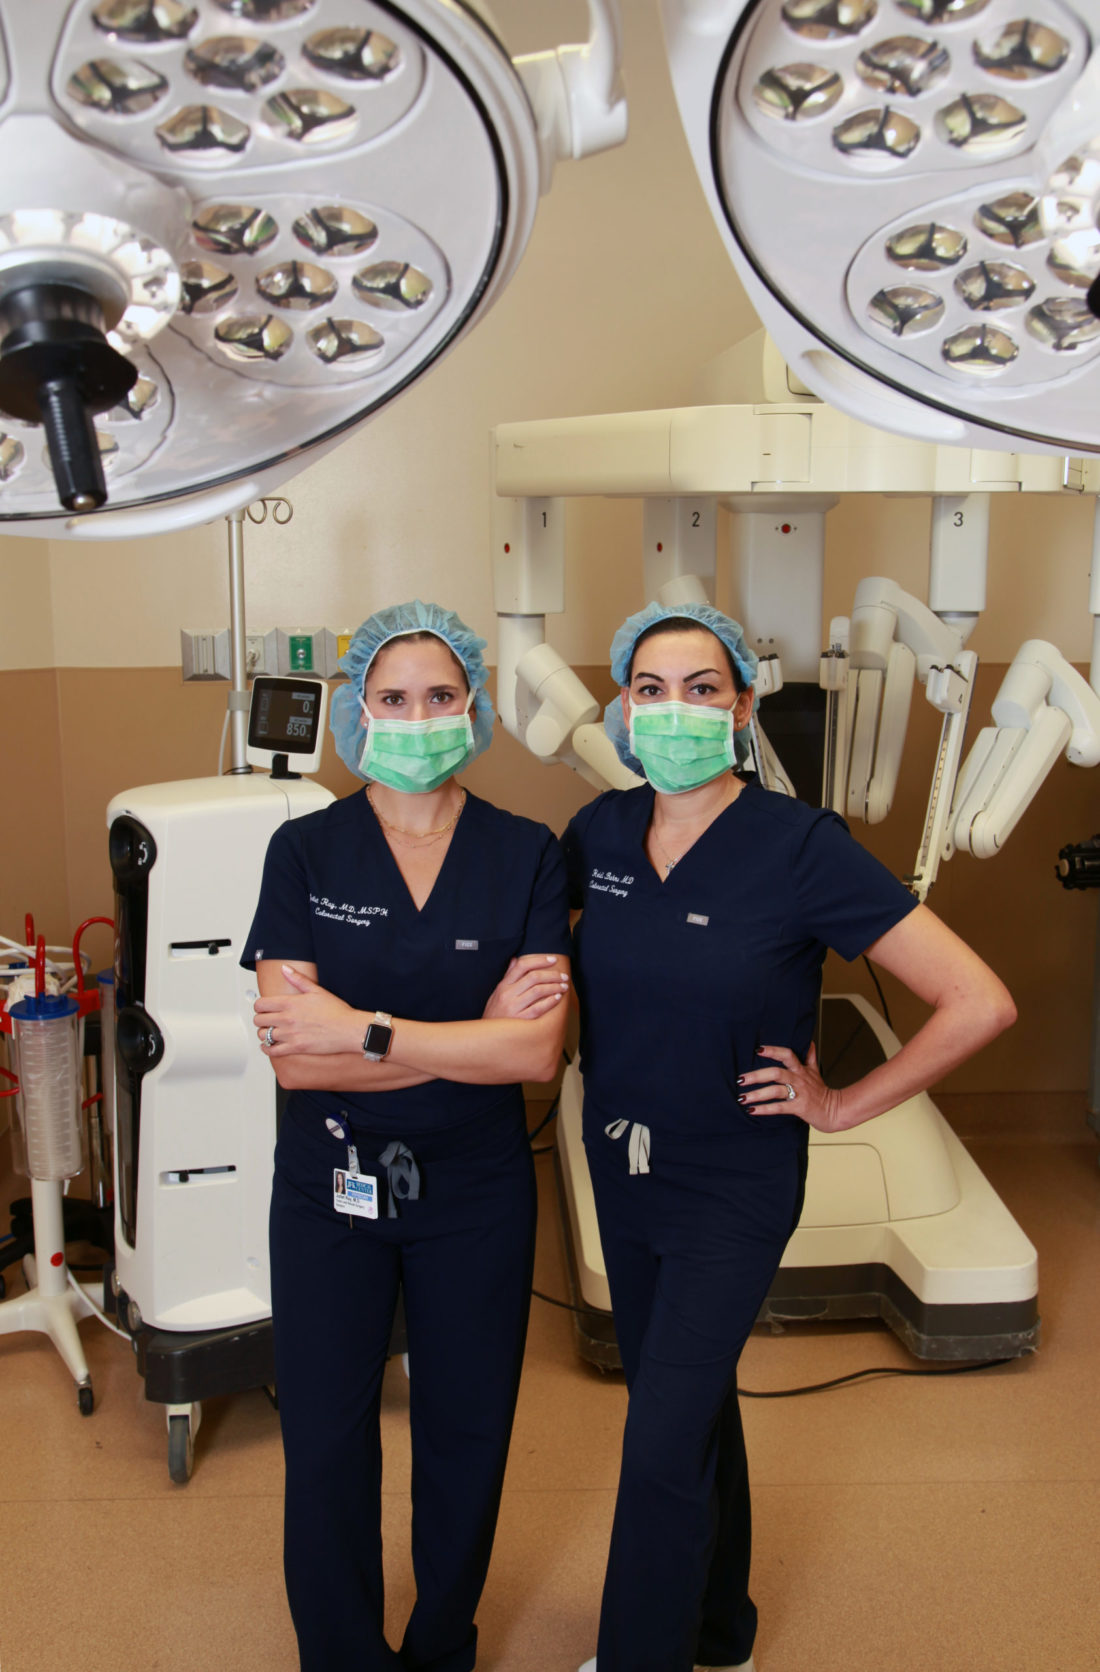 Two female surgeons wearing scrubs and face masks in the operating room